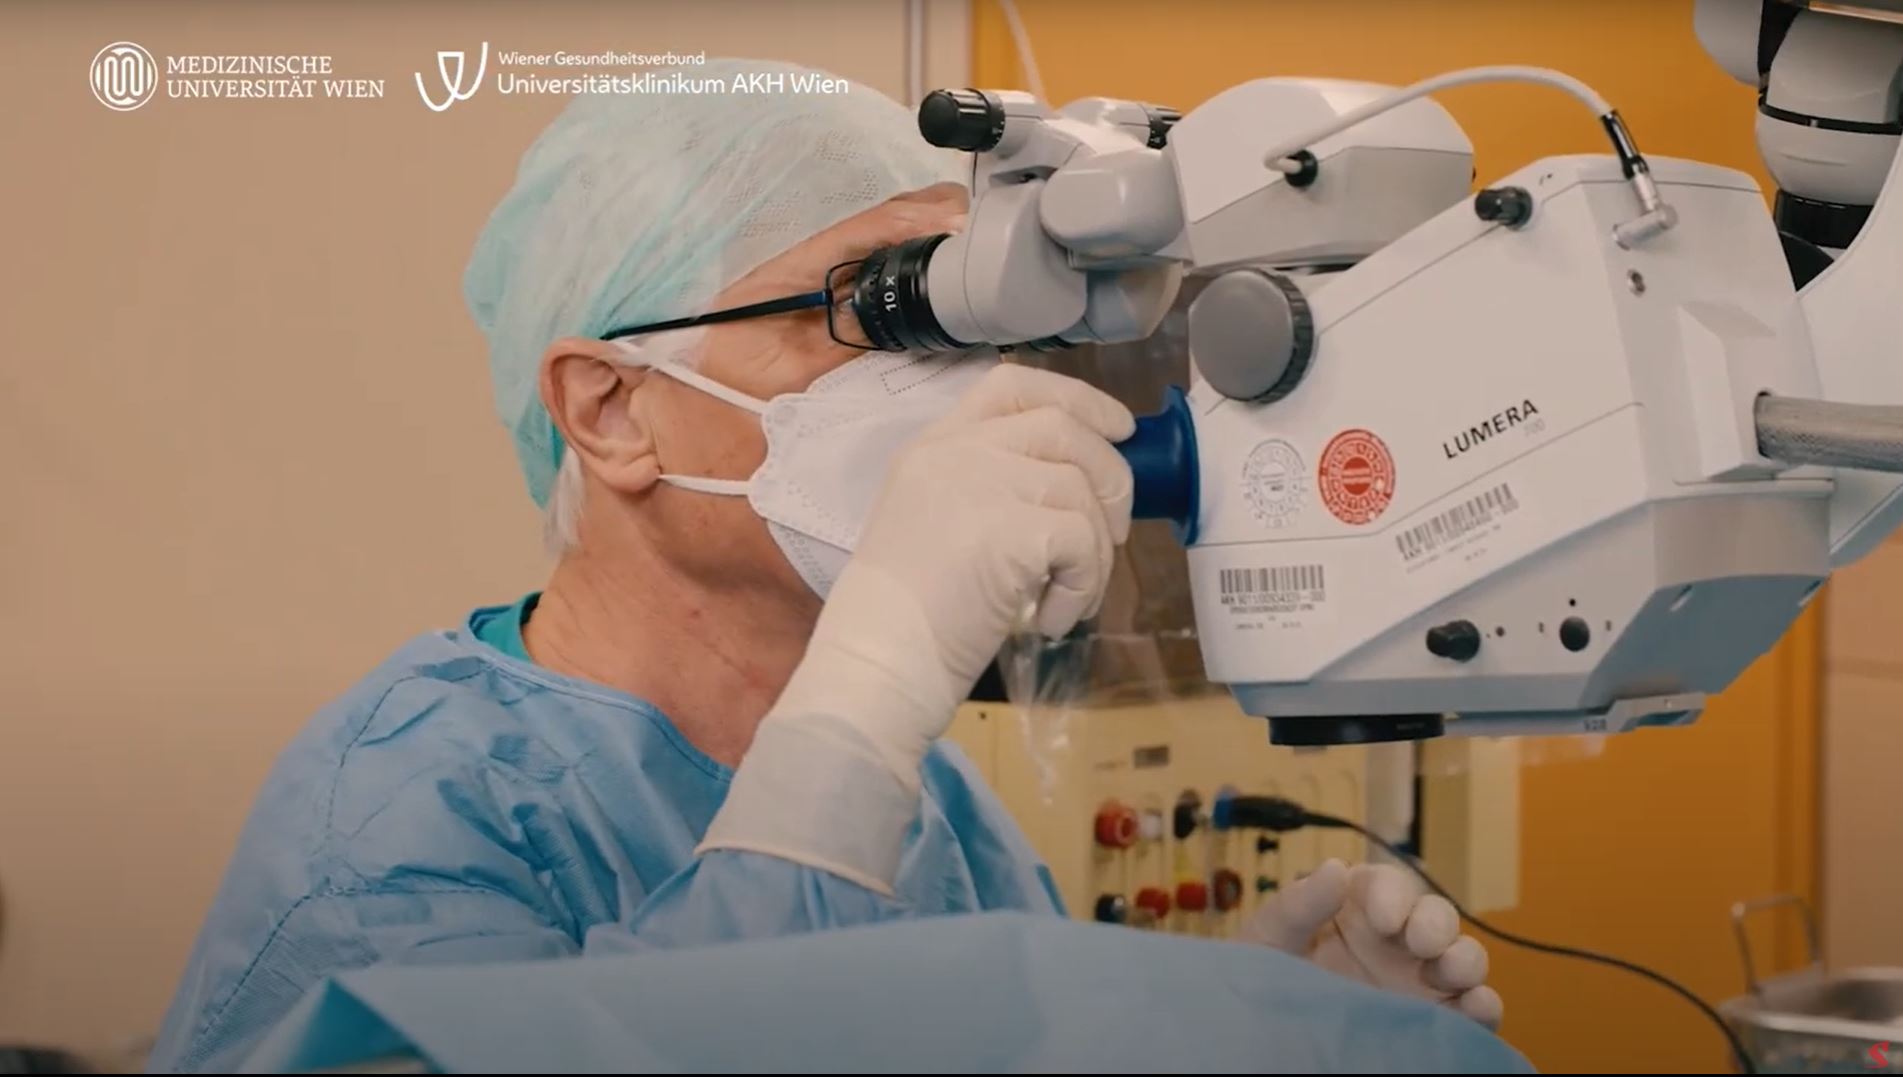 Arcuate incisions with the FEMTO LDV Z8 by Prof. Rupert Menapace. Watch a step-by-step video tutorial about FLACS with arcuate incisions for corneal astigmatism correction.
